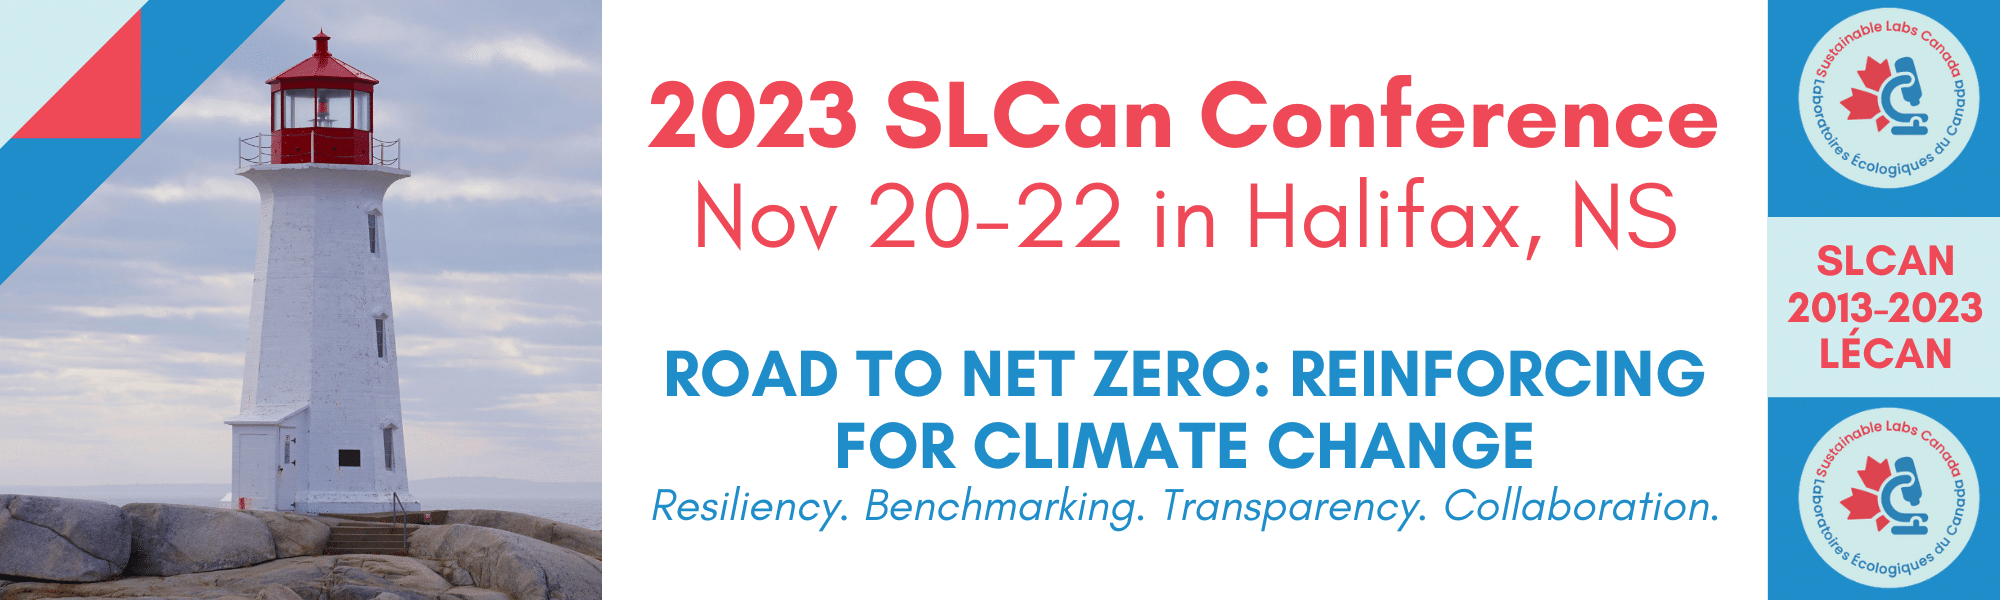 2023 SLCan Sustainable Laboratory Conference Banner